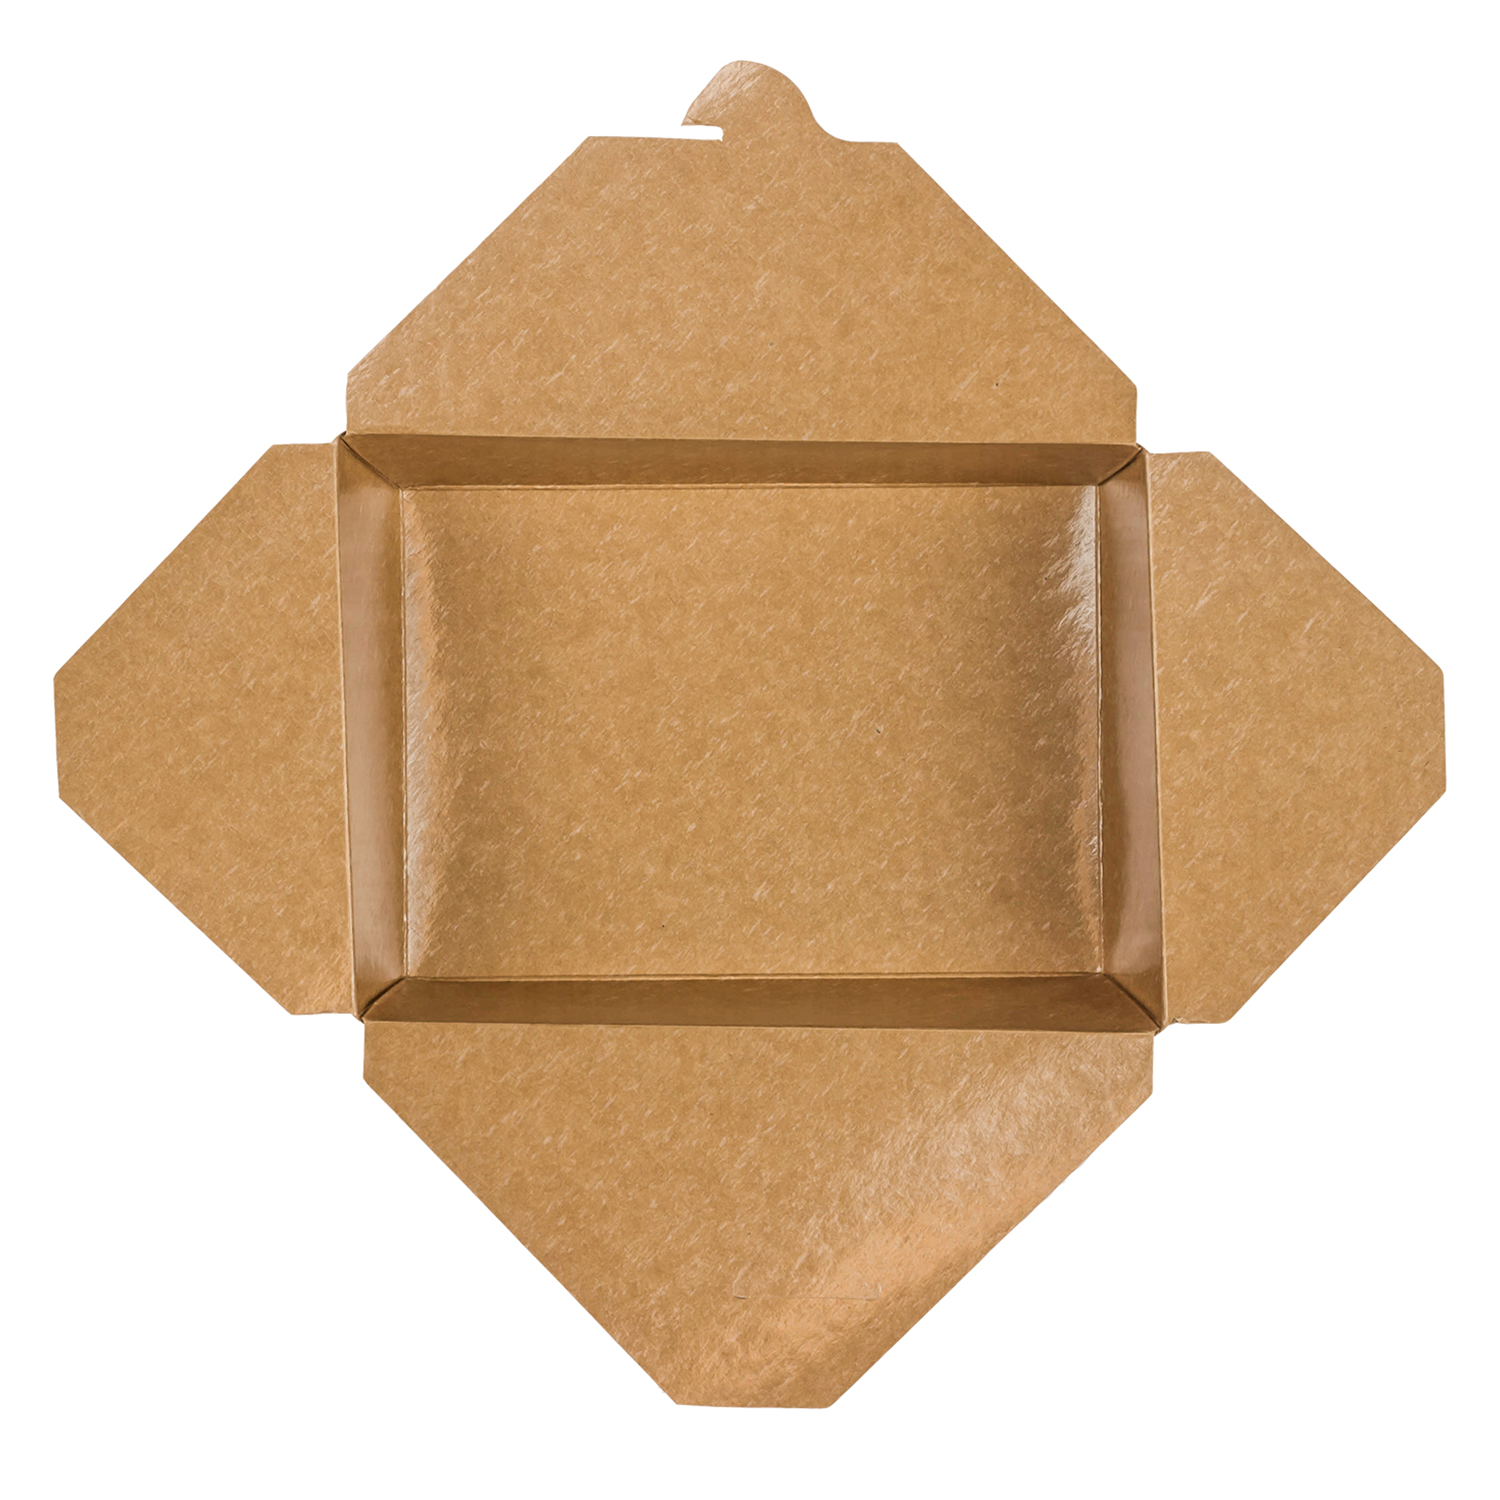 Large Kraft Take Out Containers 5ct